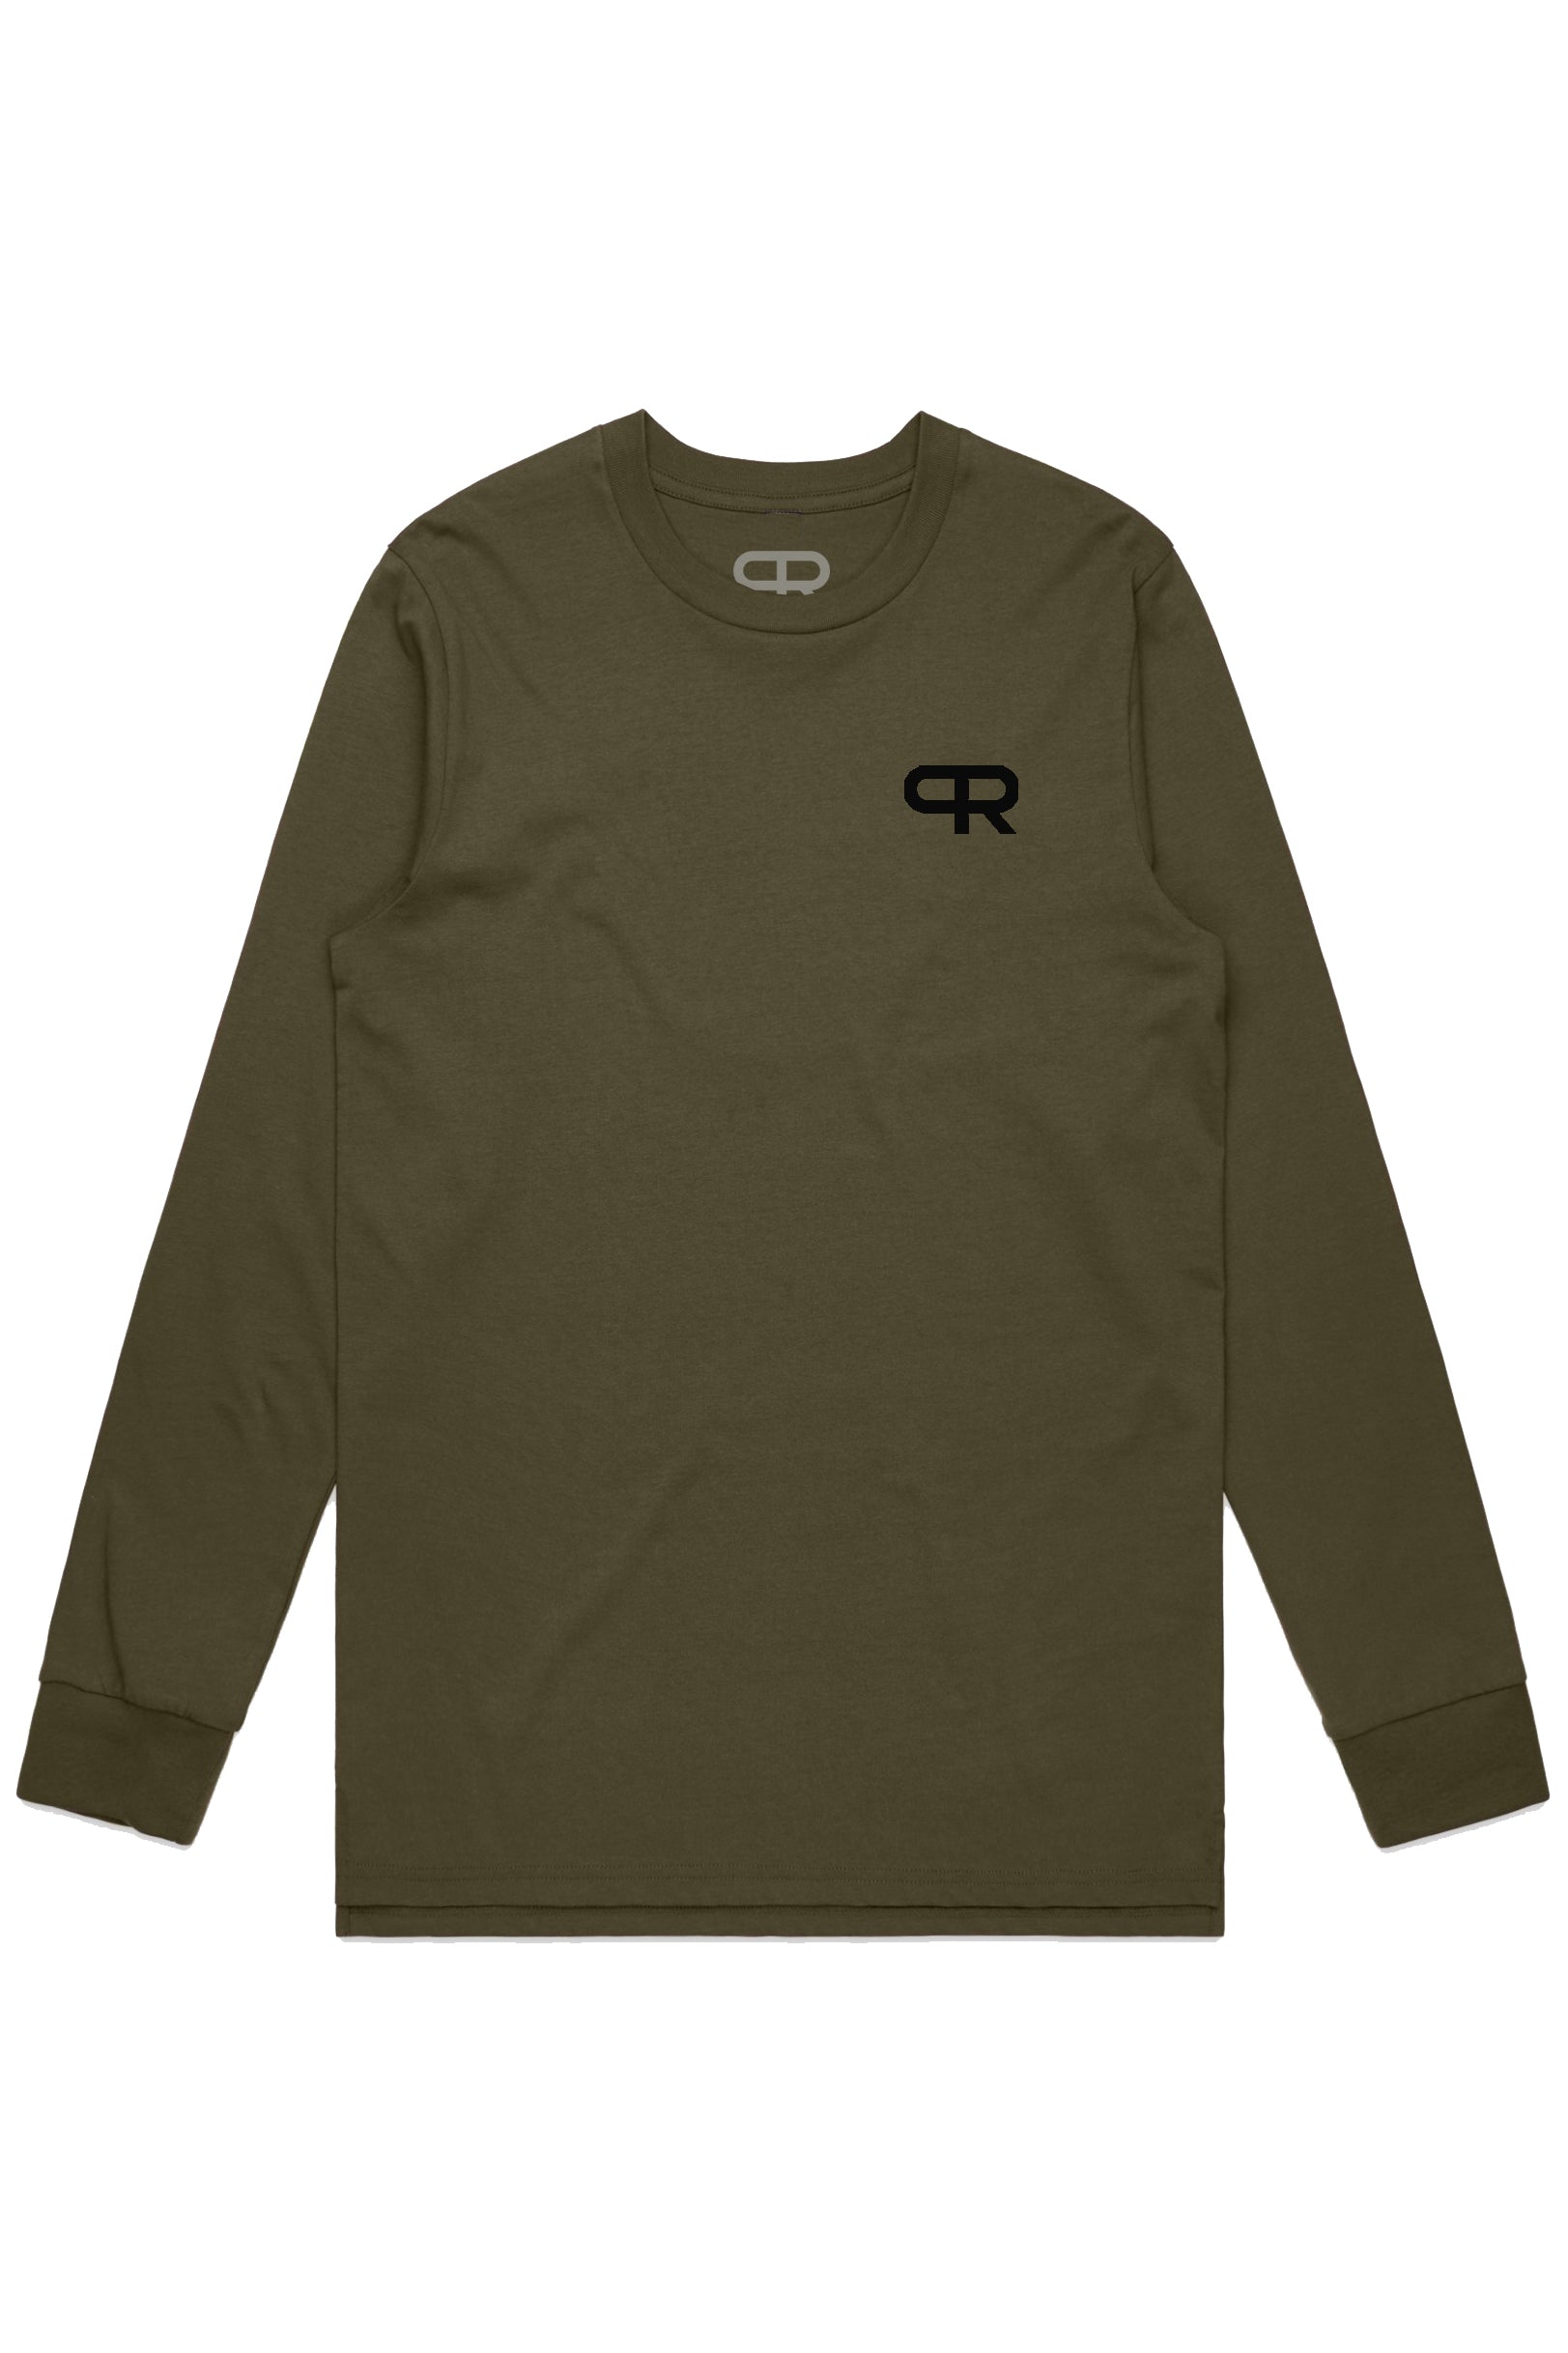 Personal Record 18 Long Sleeve - PR412 - Olive